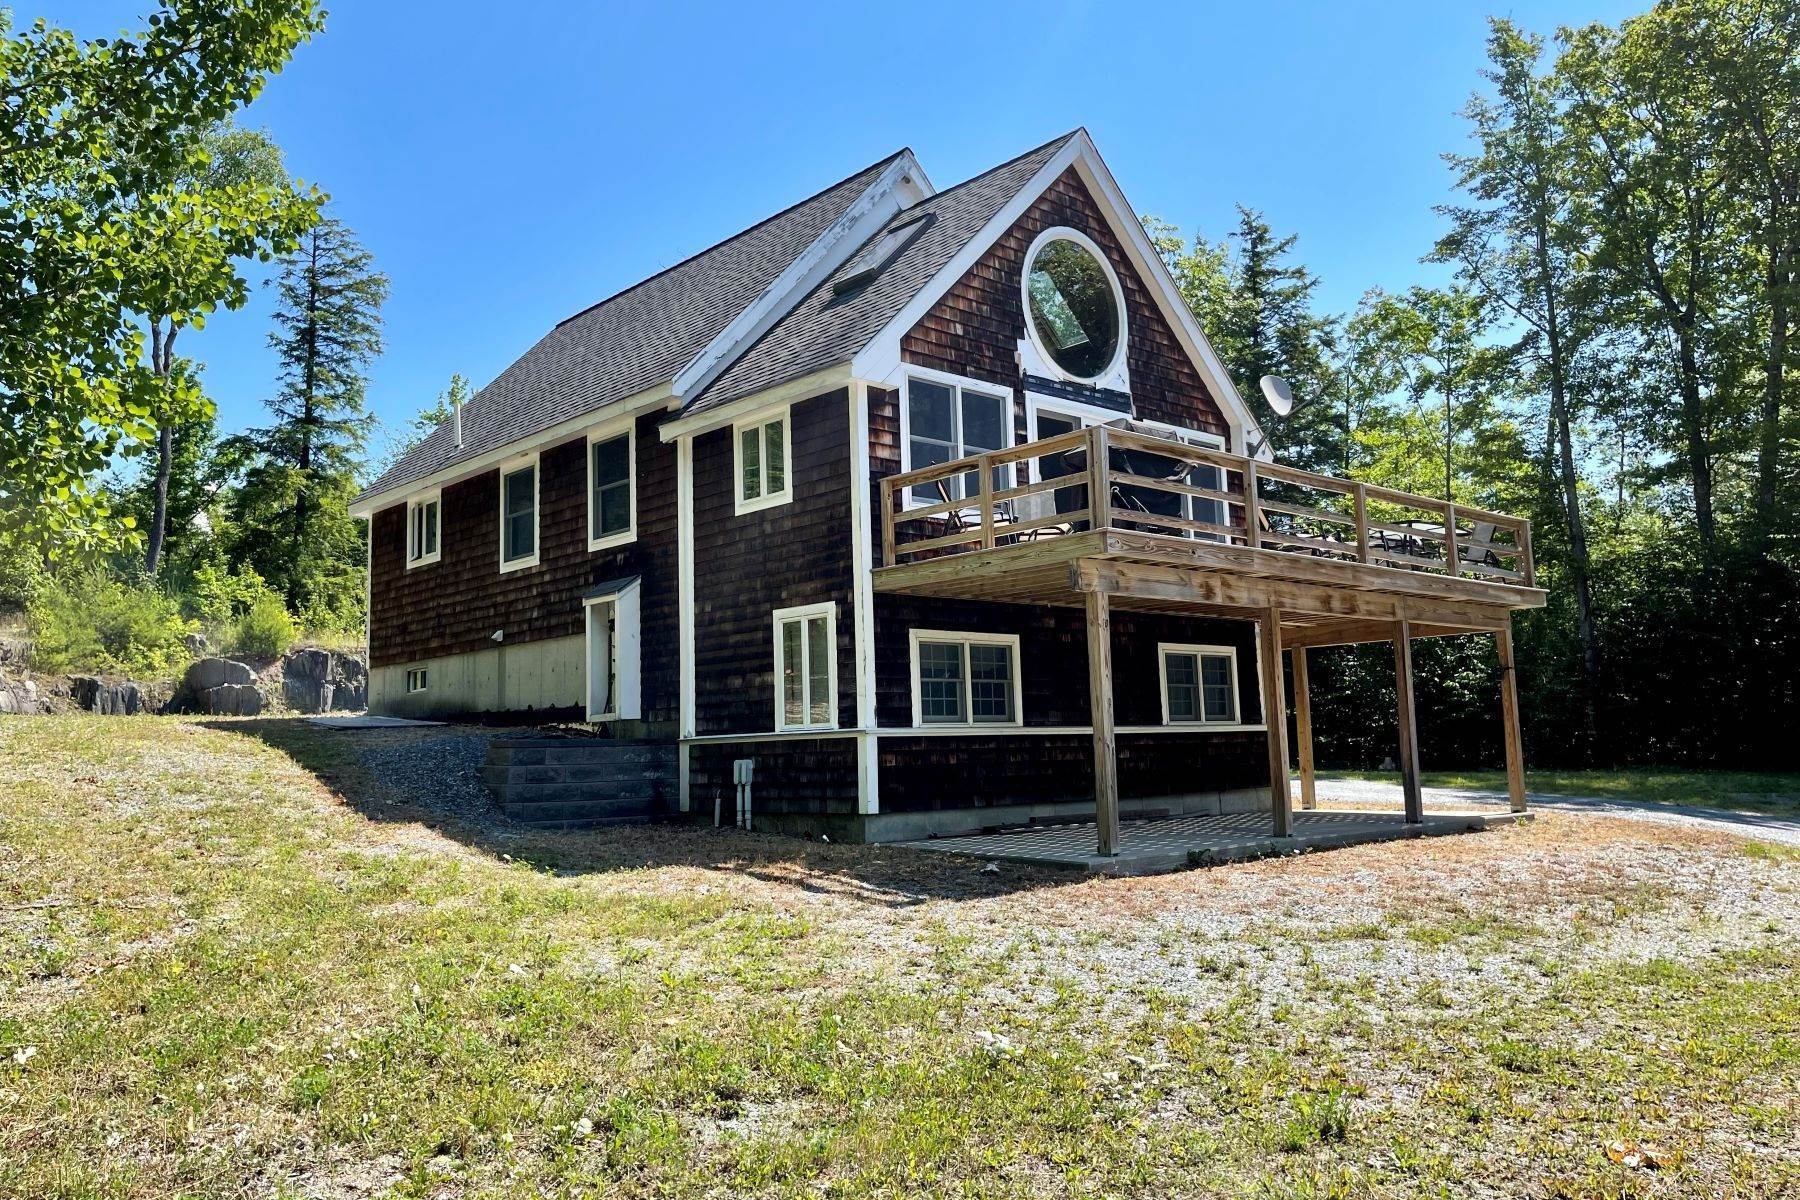 Property for Sale at Well-Built Camp Ready for Finishing Touches 1300 Tenney Pond Road, Newbury, VT 05051